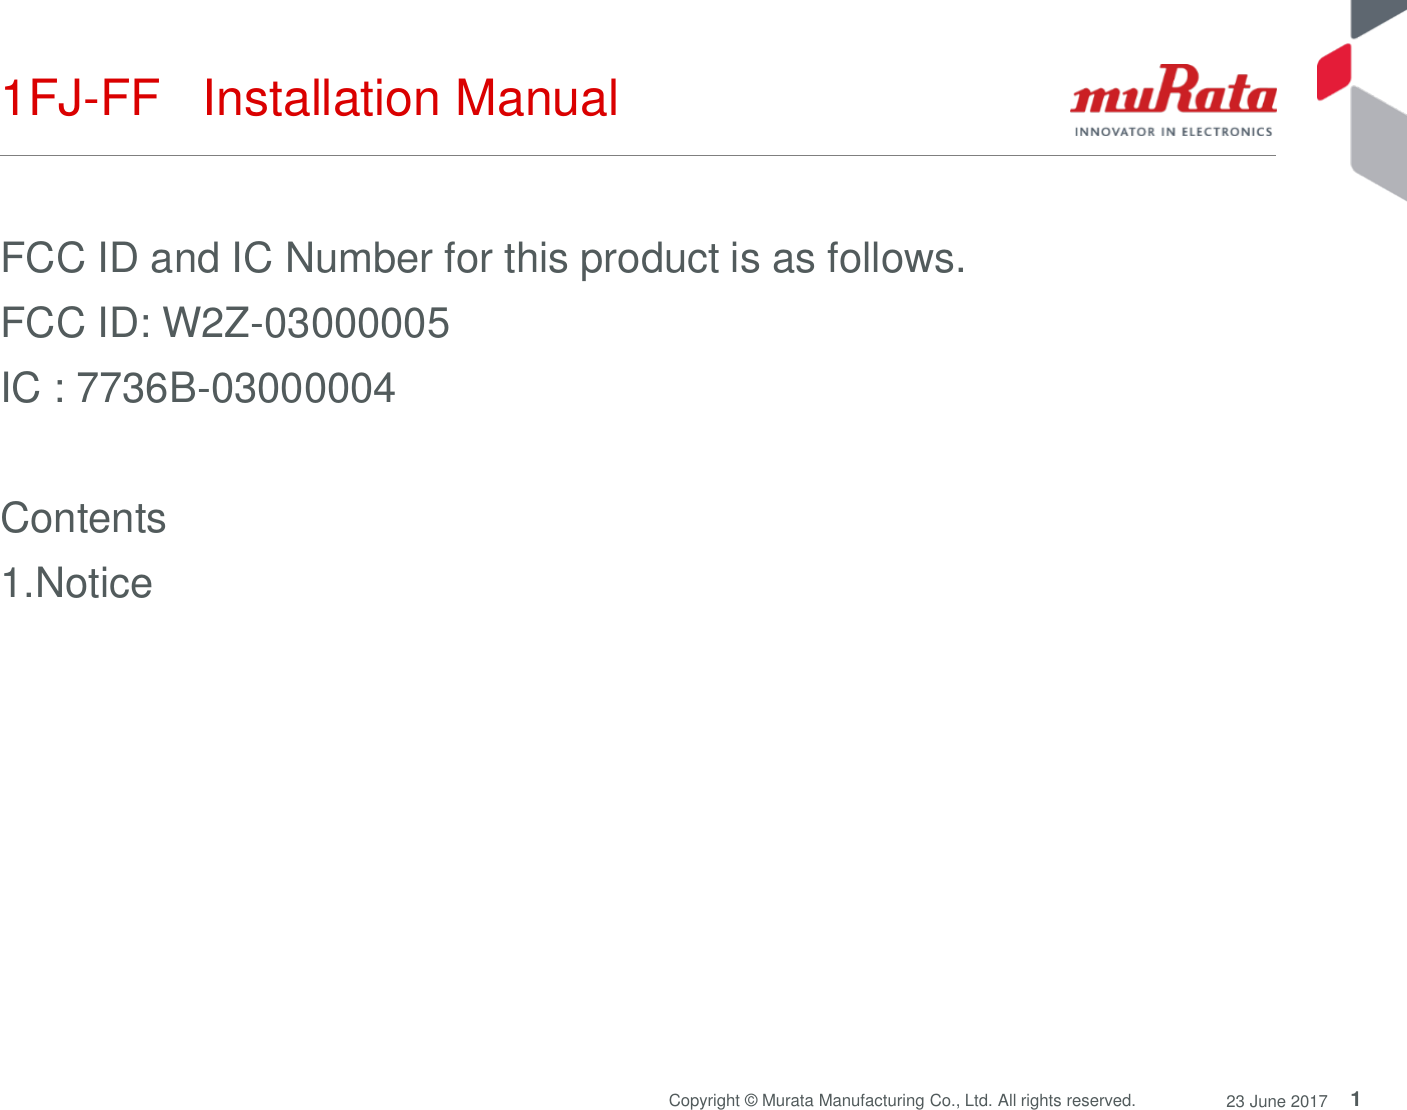 1Copyright © Murata Manufacturing Co., Ltd. All rights reserved. 23 June 20171FJ-FF   Installation Manual FCC ID and IC Number for this product is as follows. FCC ID: W2Z-03000005 IC : 7736B-03000004Contents 1.Notice 